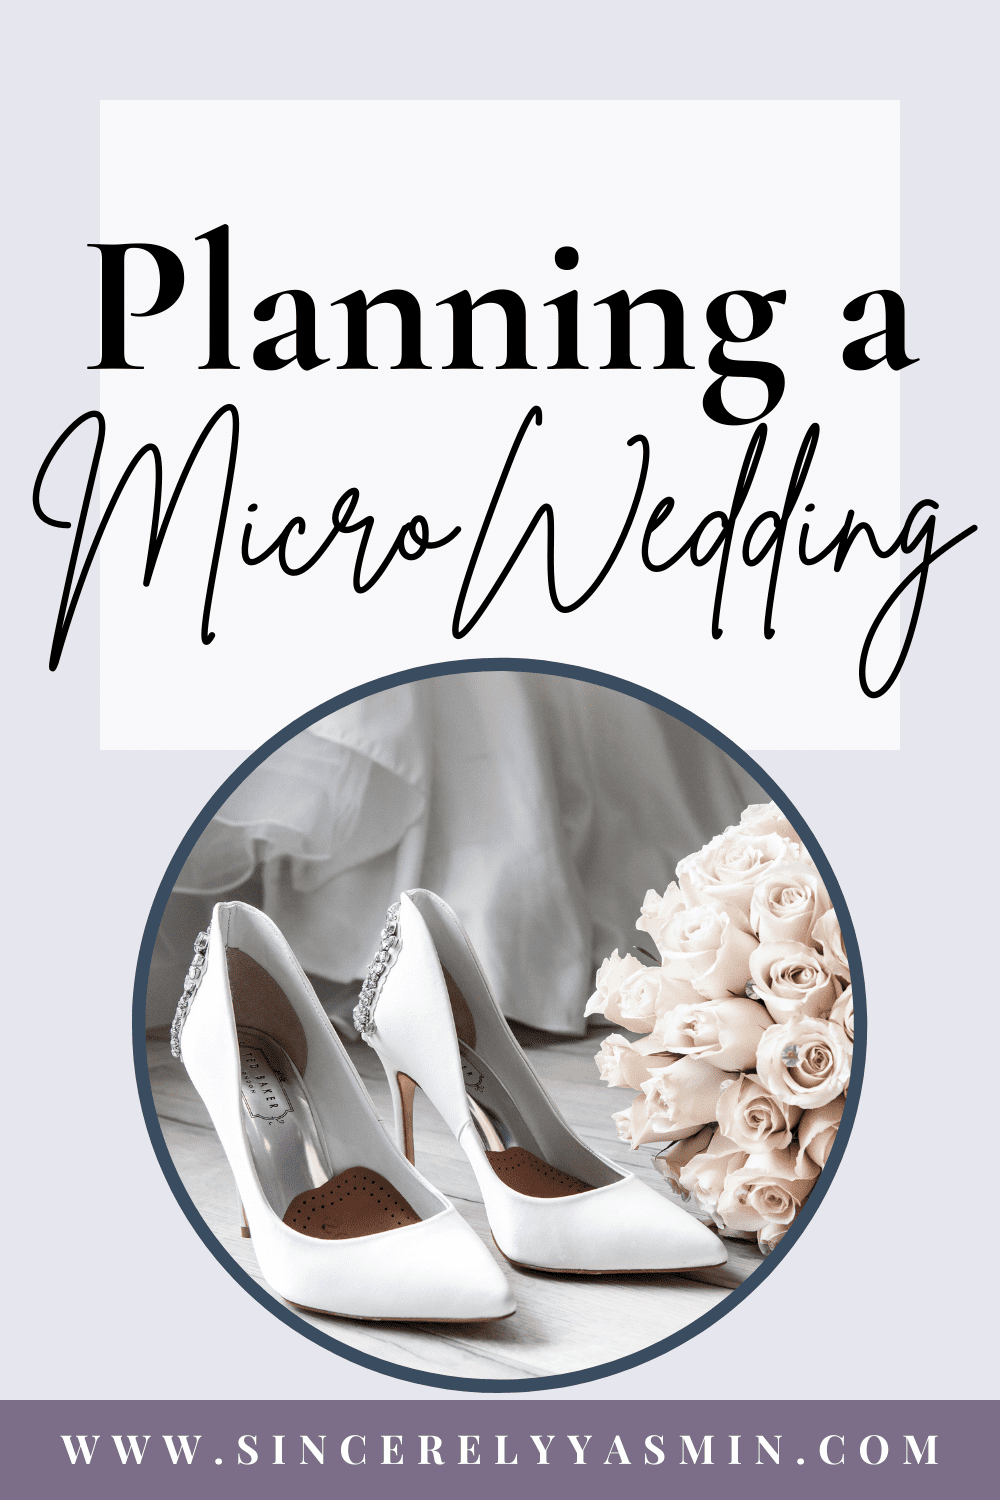 Planning a Micro Wedding: 4 More Important Things to Keep in Mind